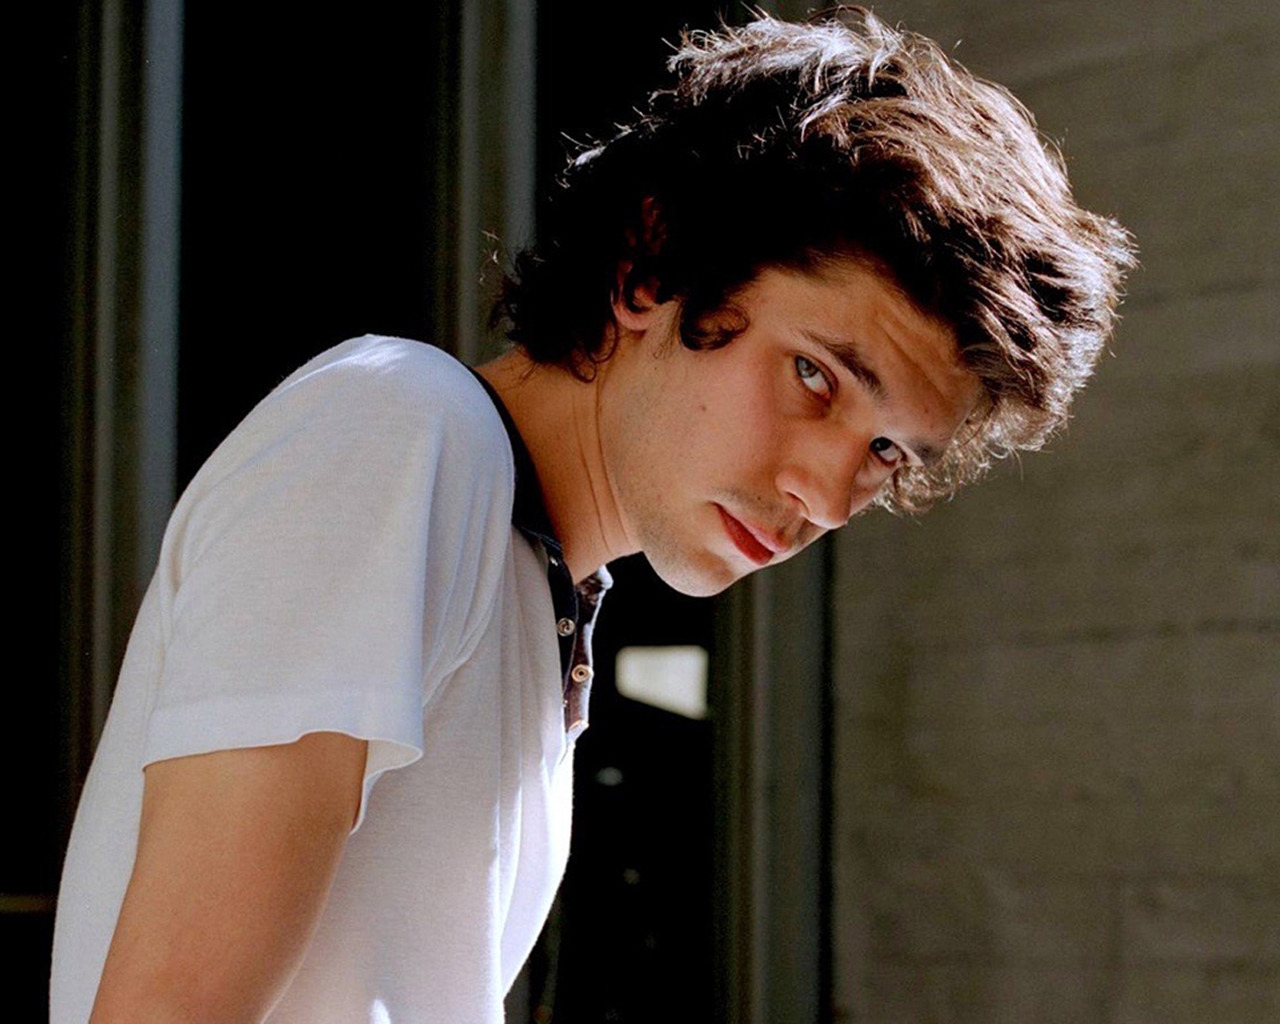 Ben Whishaw for 1280 x 1024 resolution